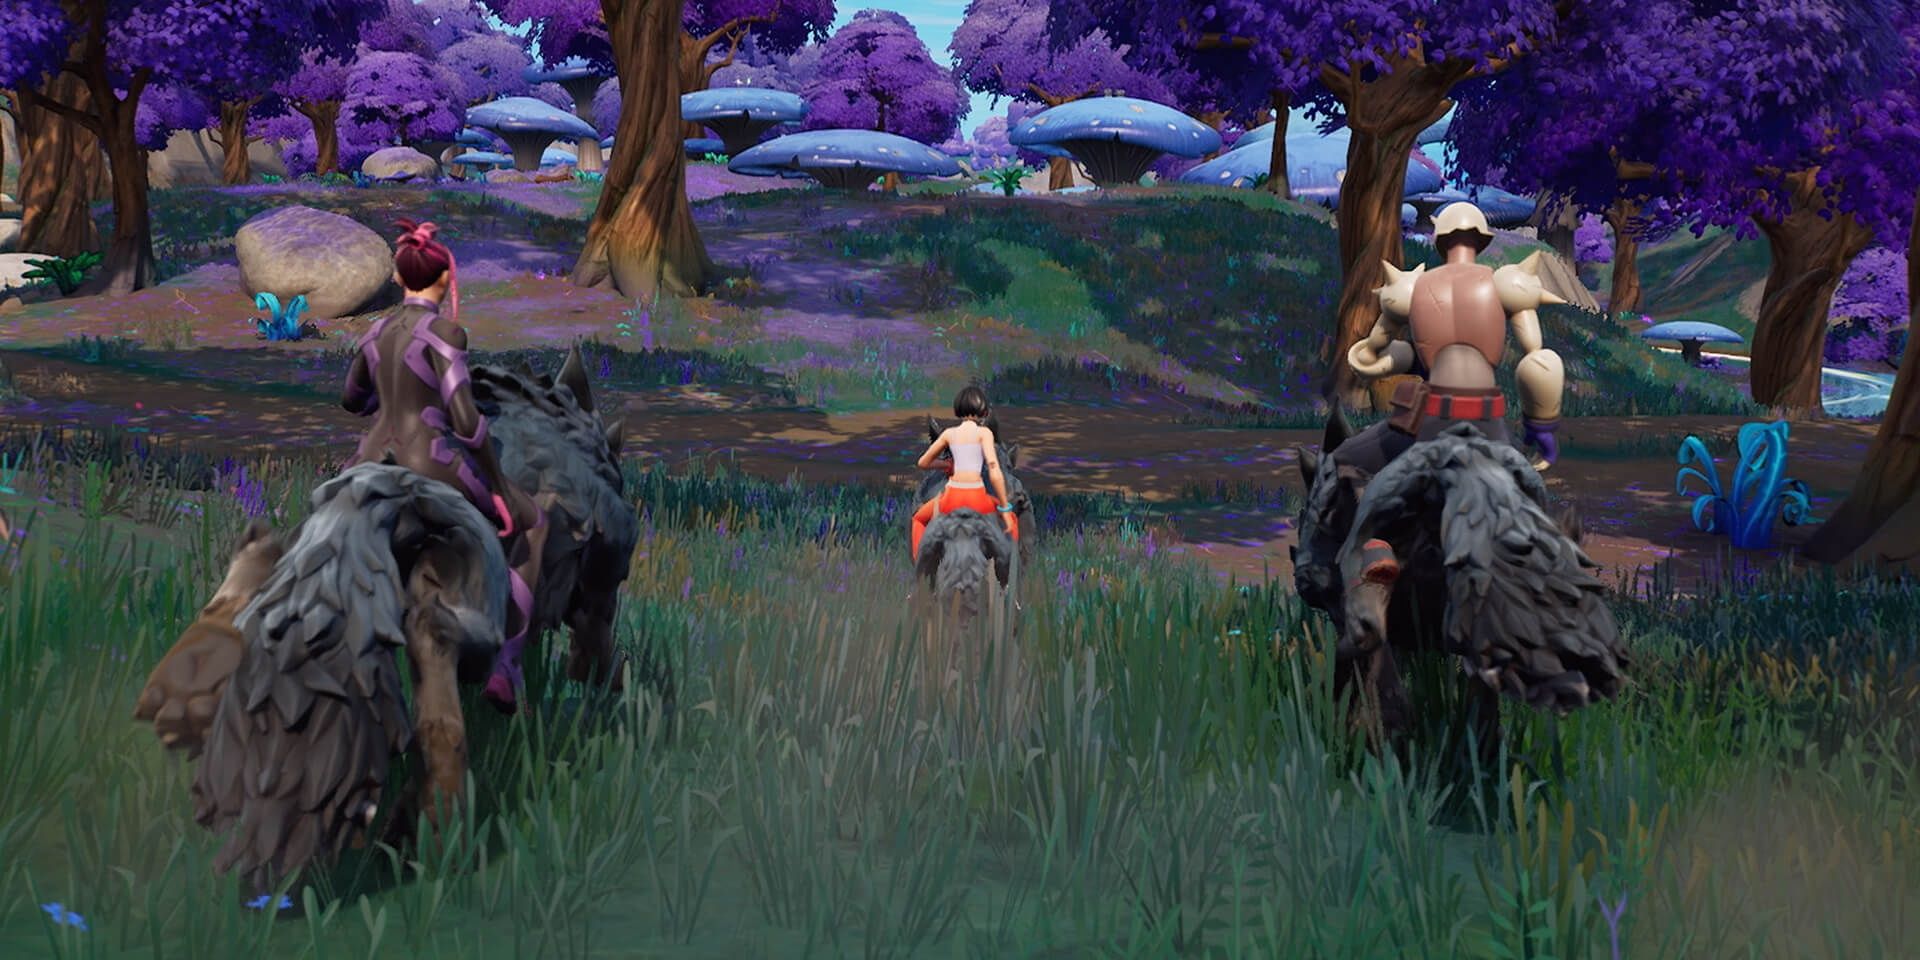 Three fortnite characters riding wolves in a forest.